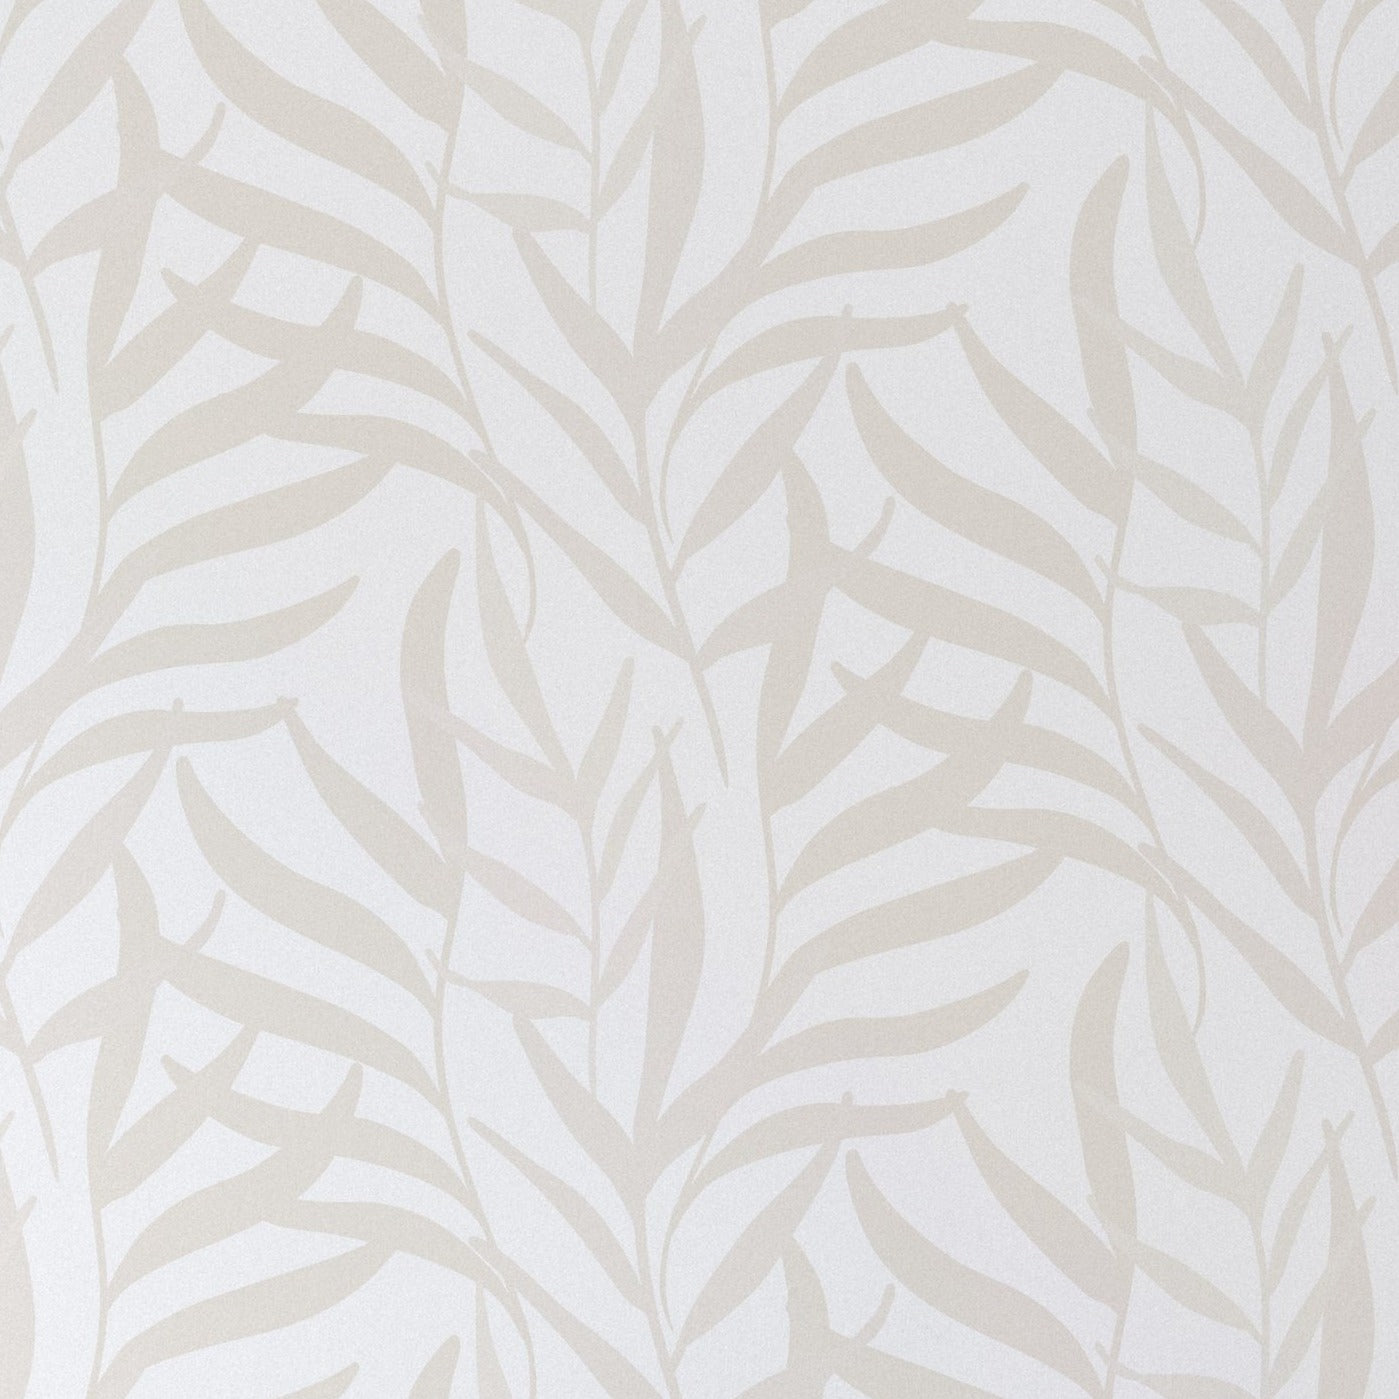 Close-up view of 'Earthy Wallpaper' displaying its detailed leaf patterns in soft, neutral tones, offering a sense of serenity and connection to nature, perfect for a calming interior design element.